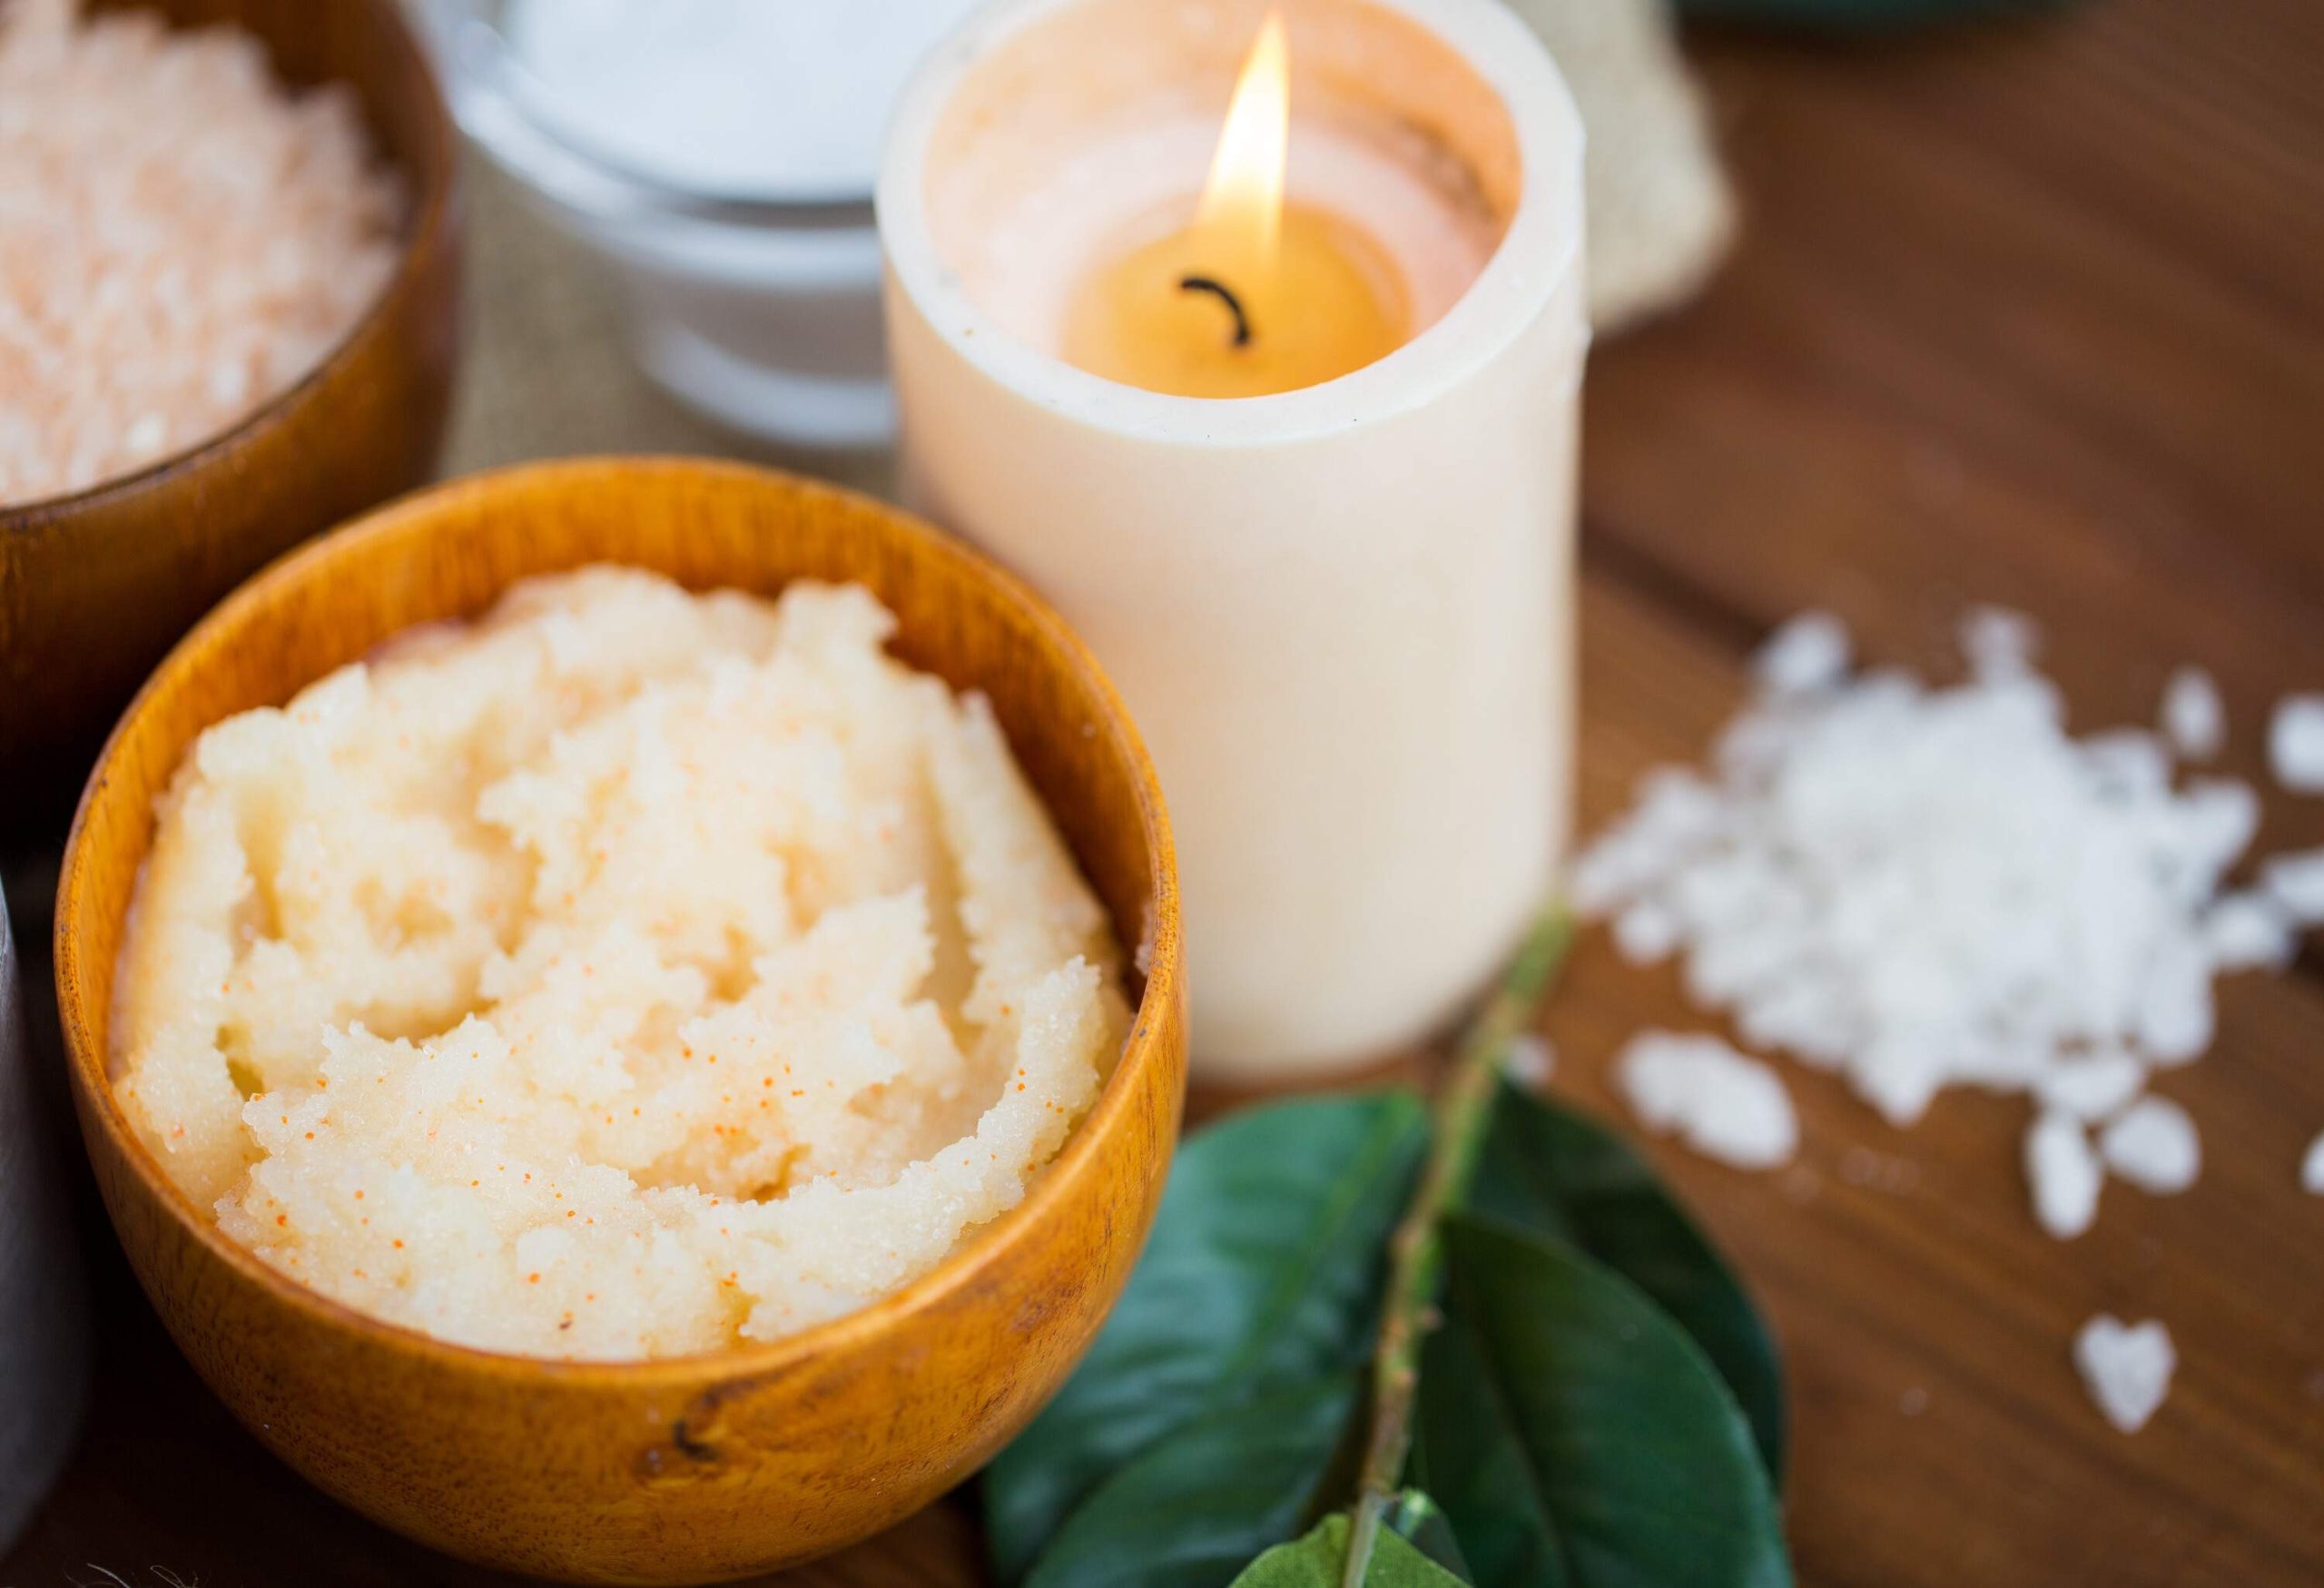 A lit candle is next to a small bowl filled with a body scrub.